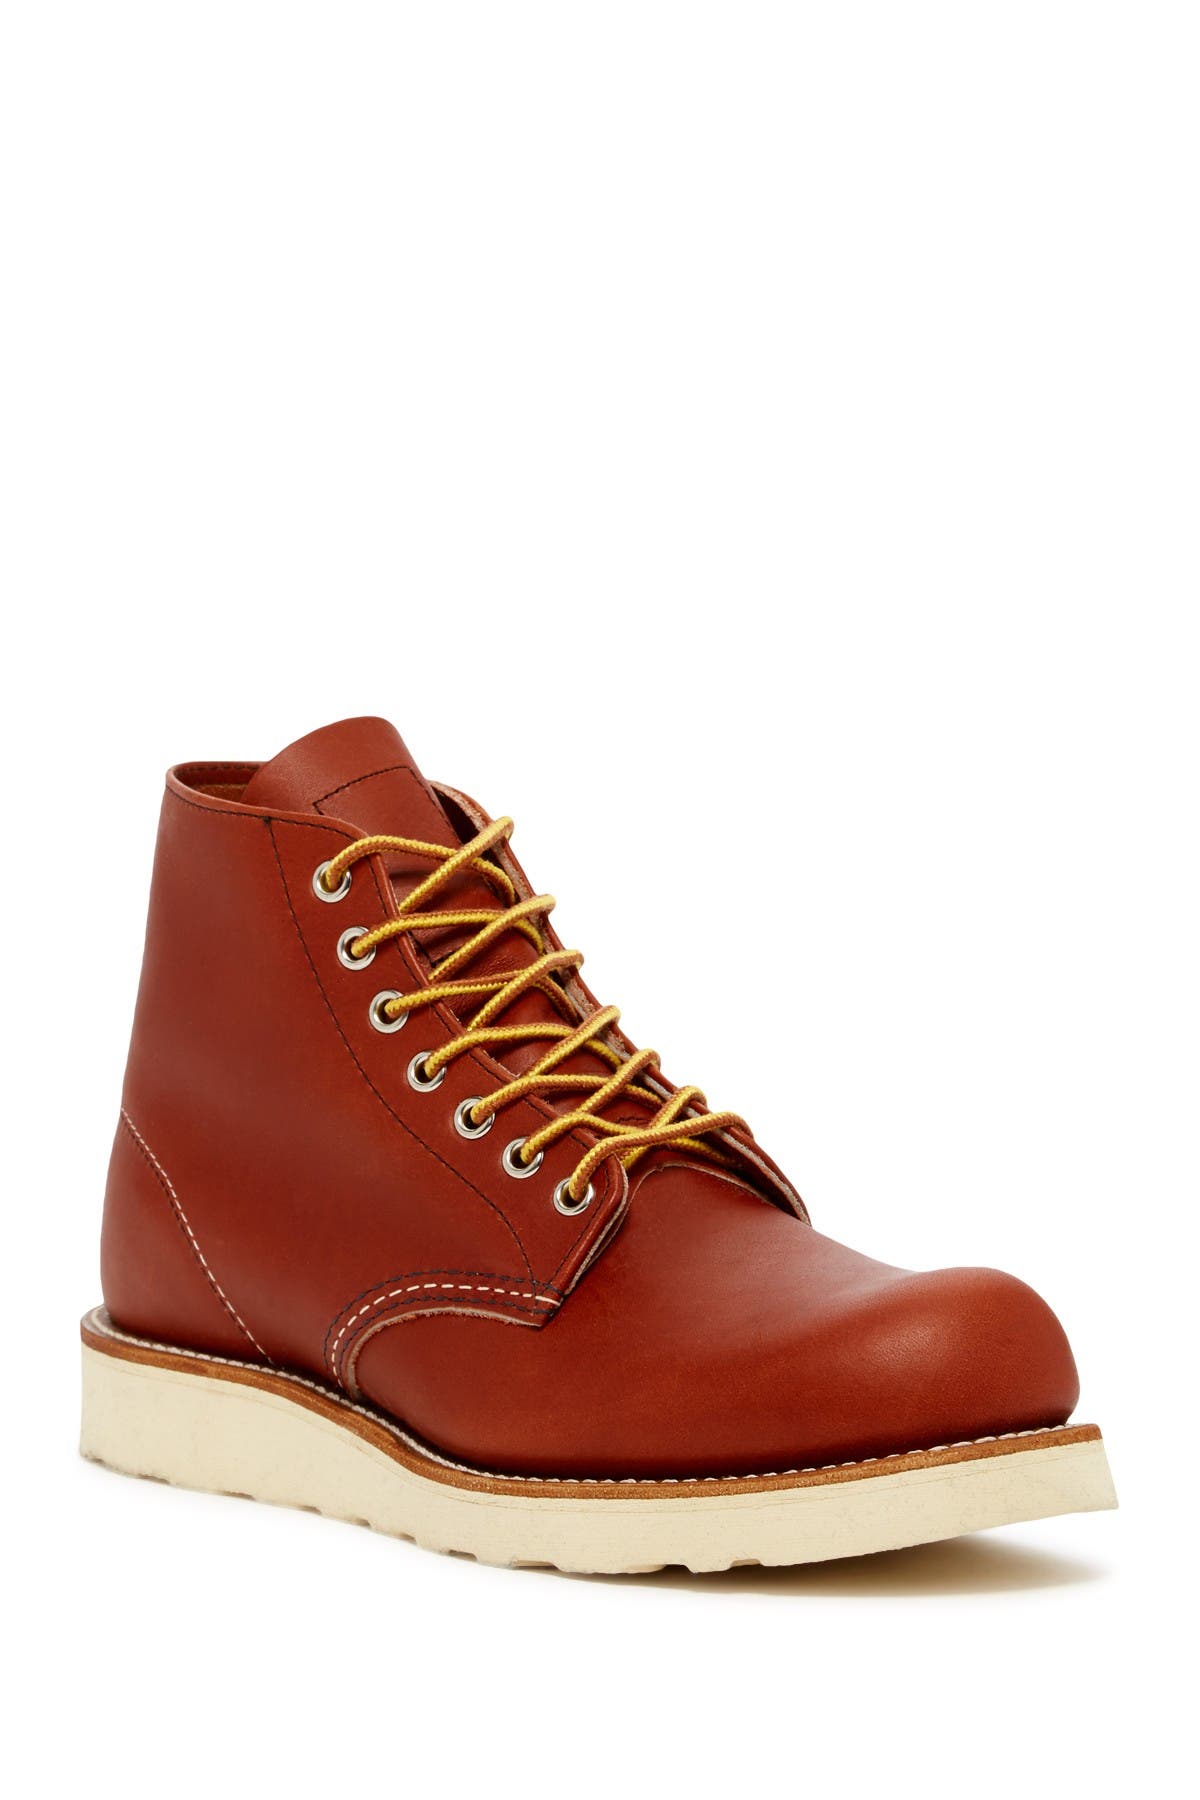 red wing factory 2nd